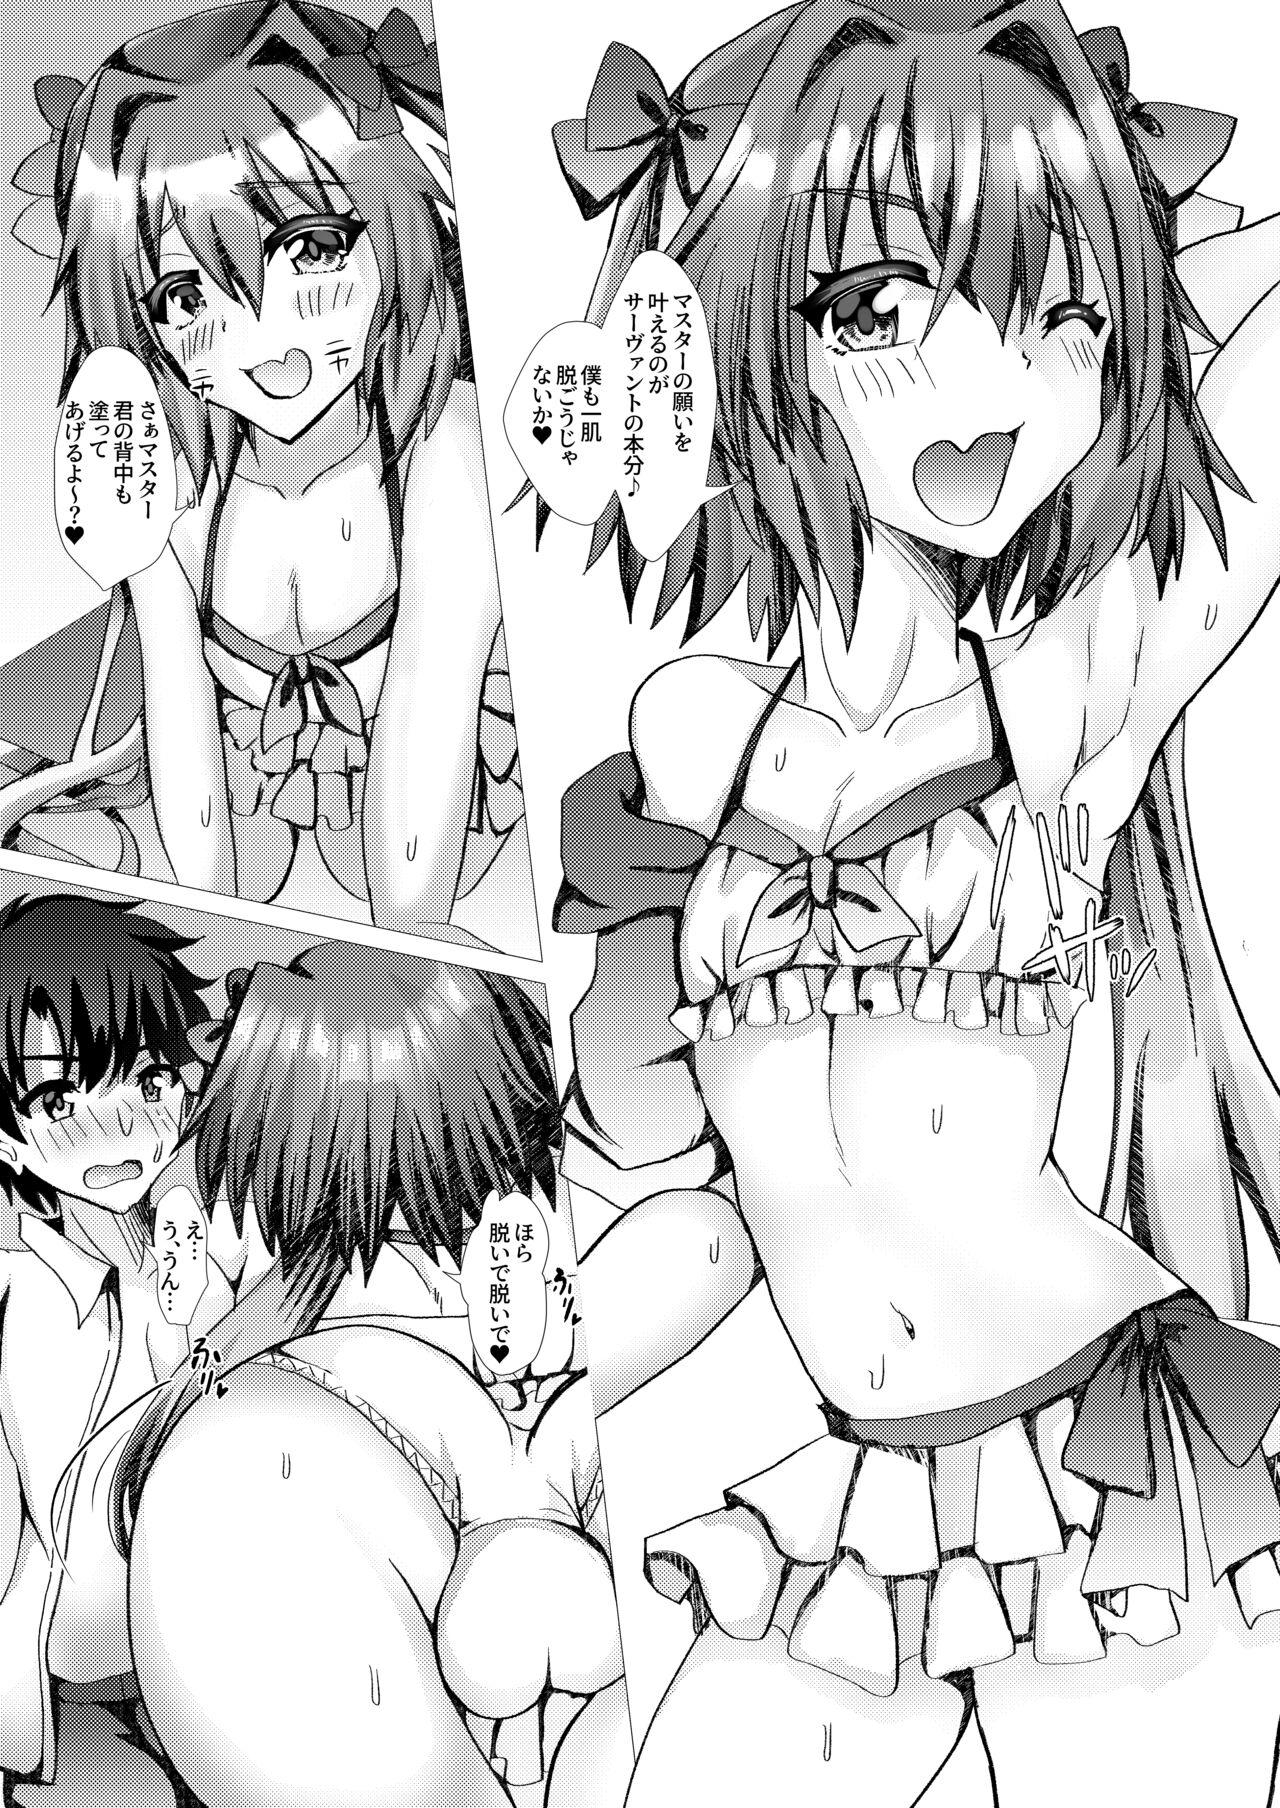 Pasivo Astolfo to Summer Vacation + Omake - Fate grand order Cumshot - Page 4